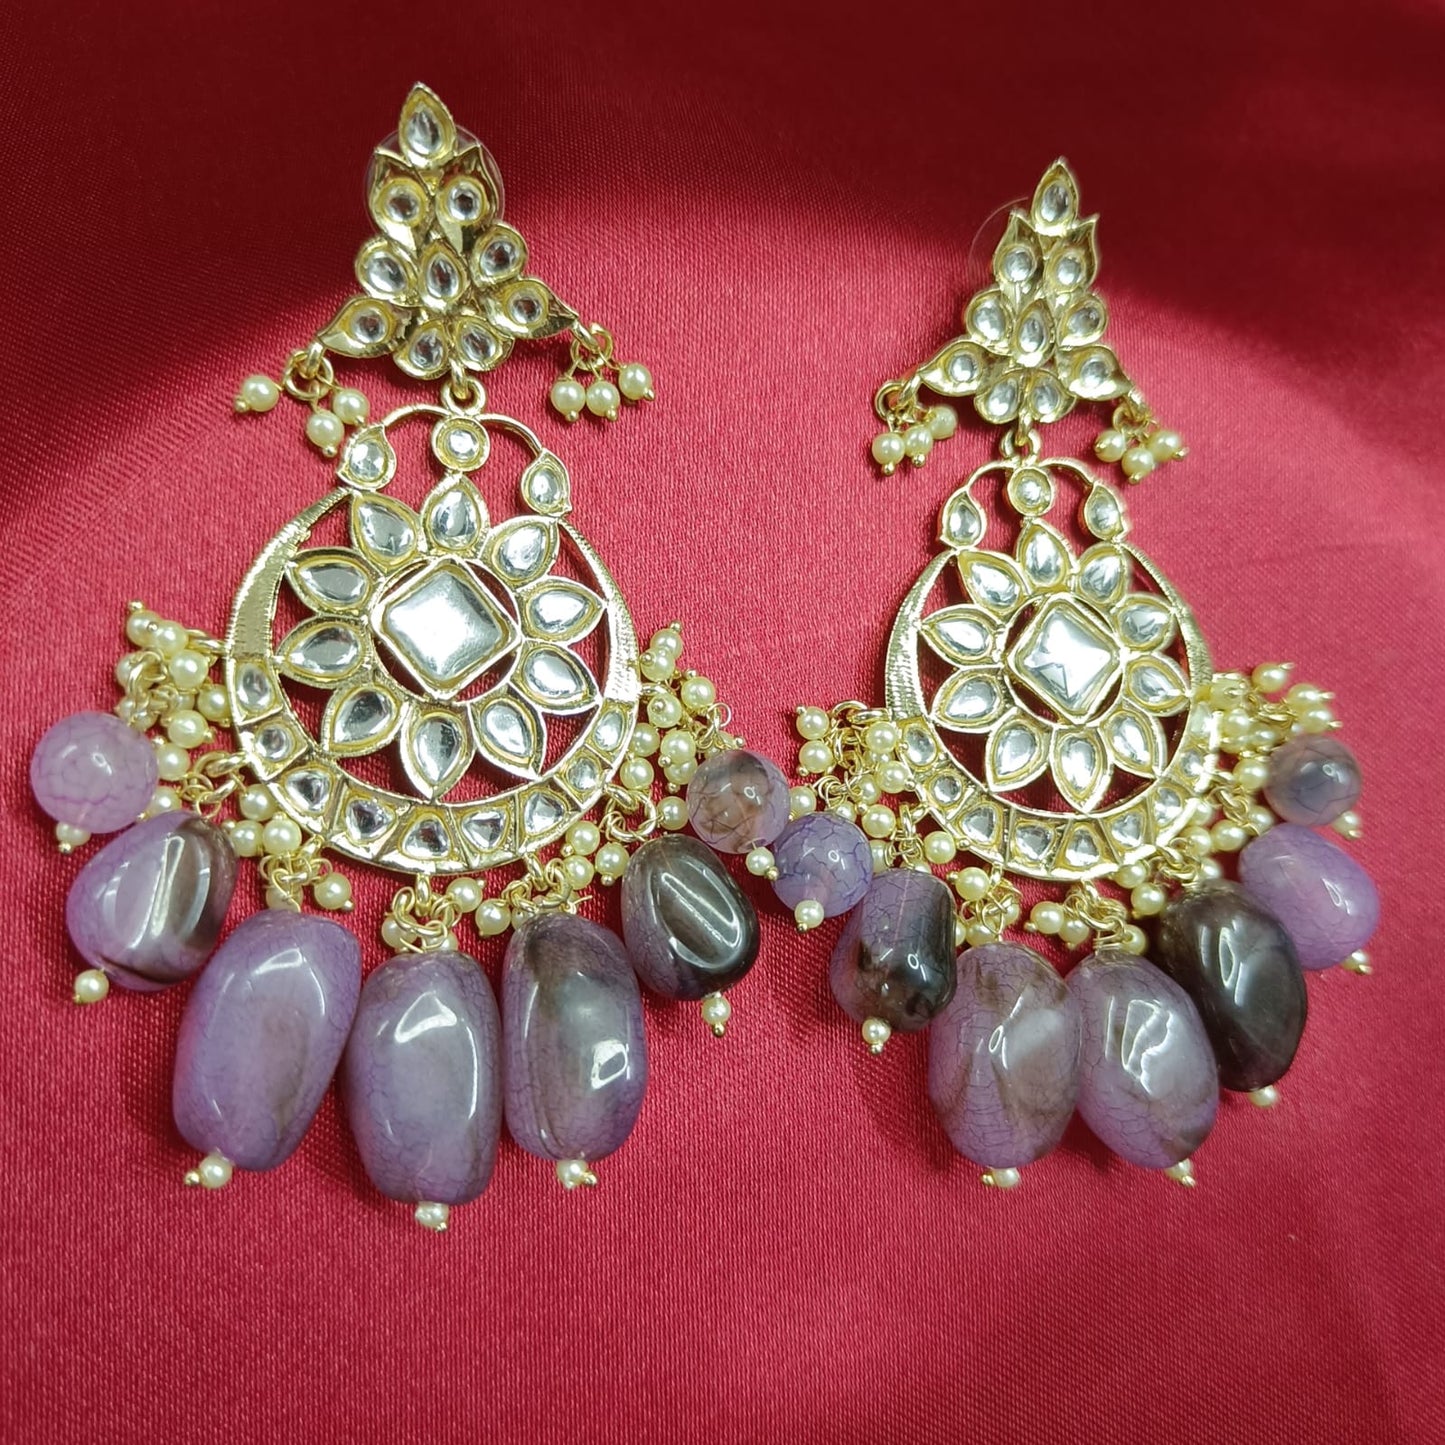 Bdiva 18K Gold Plated Amethyst Earrings with Semi Cultured Pearls.